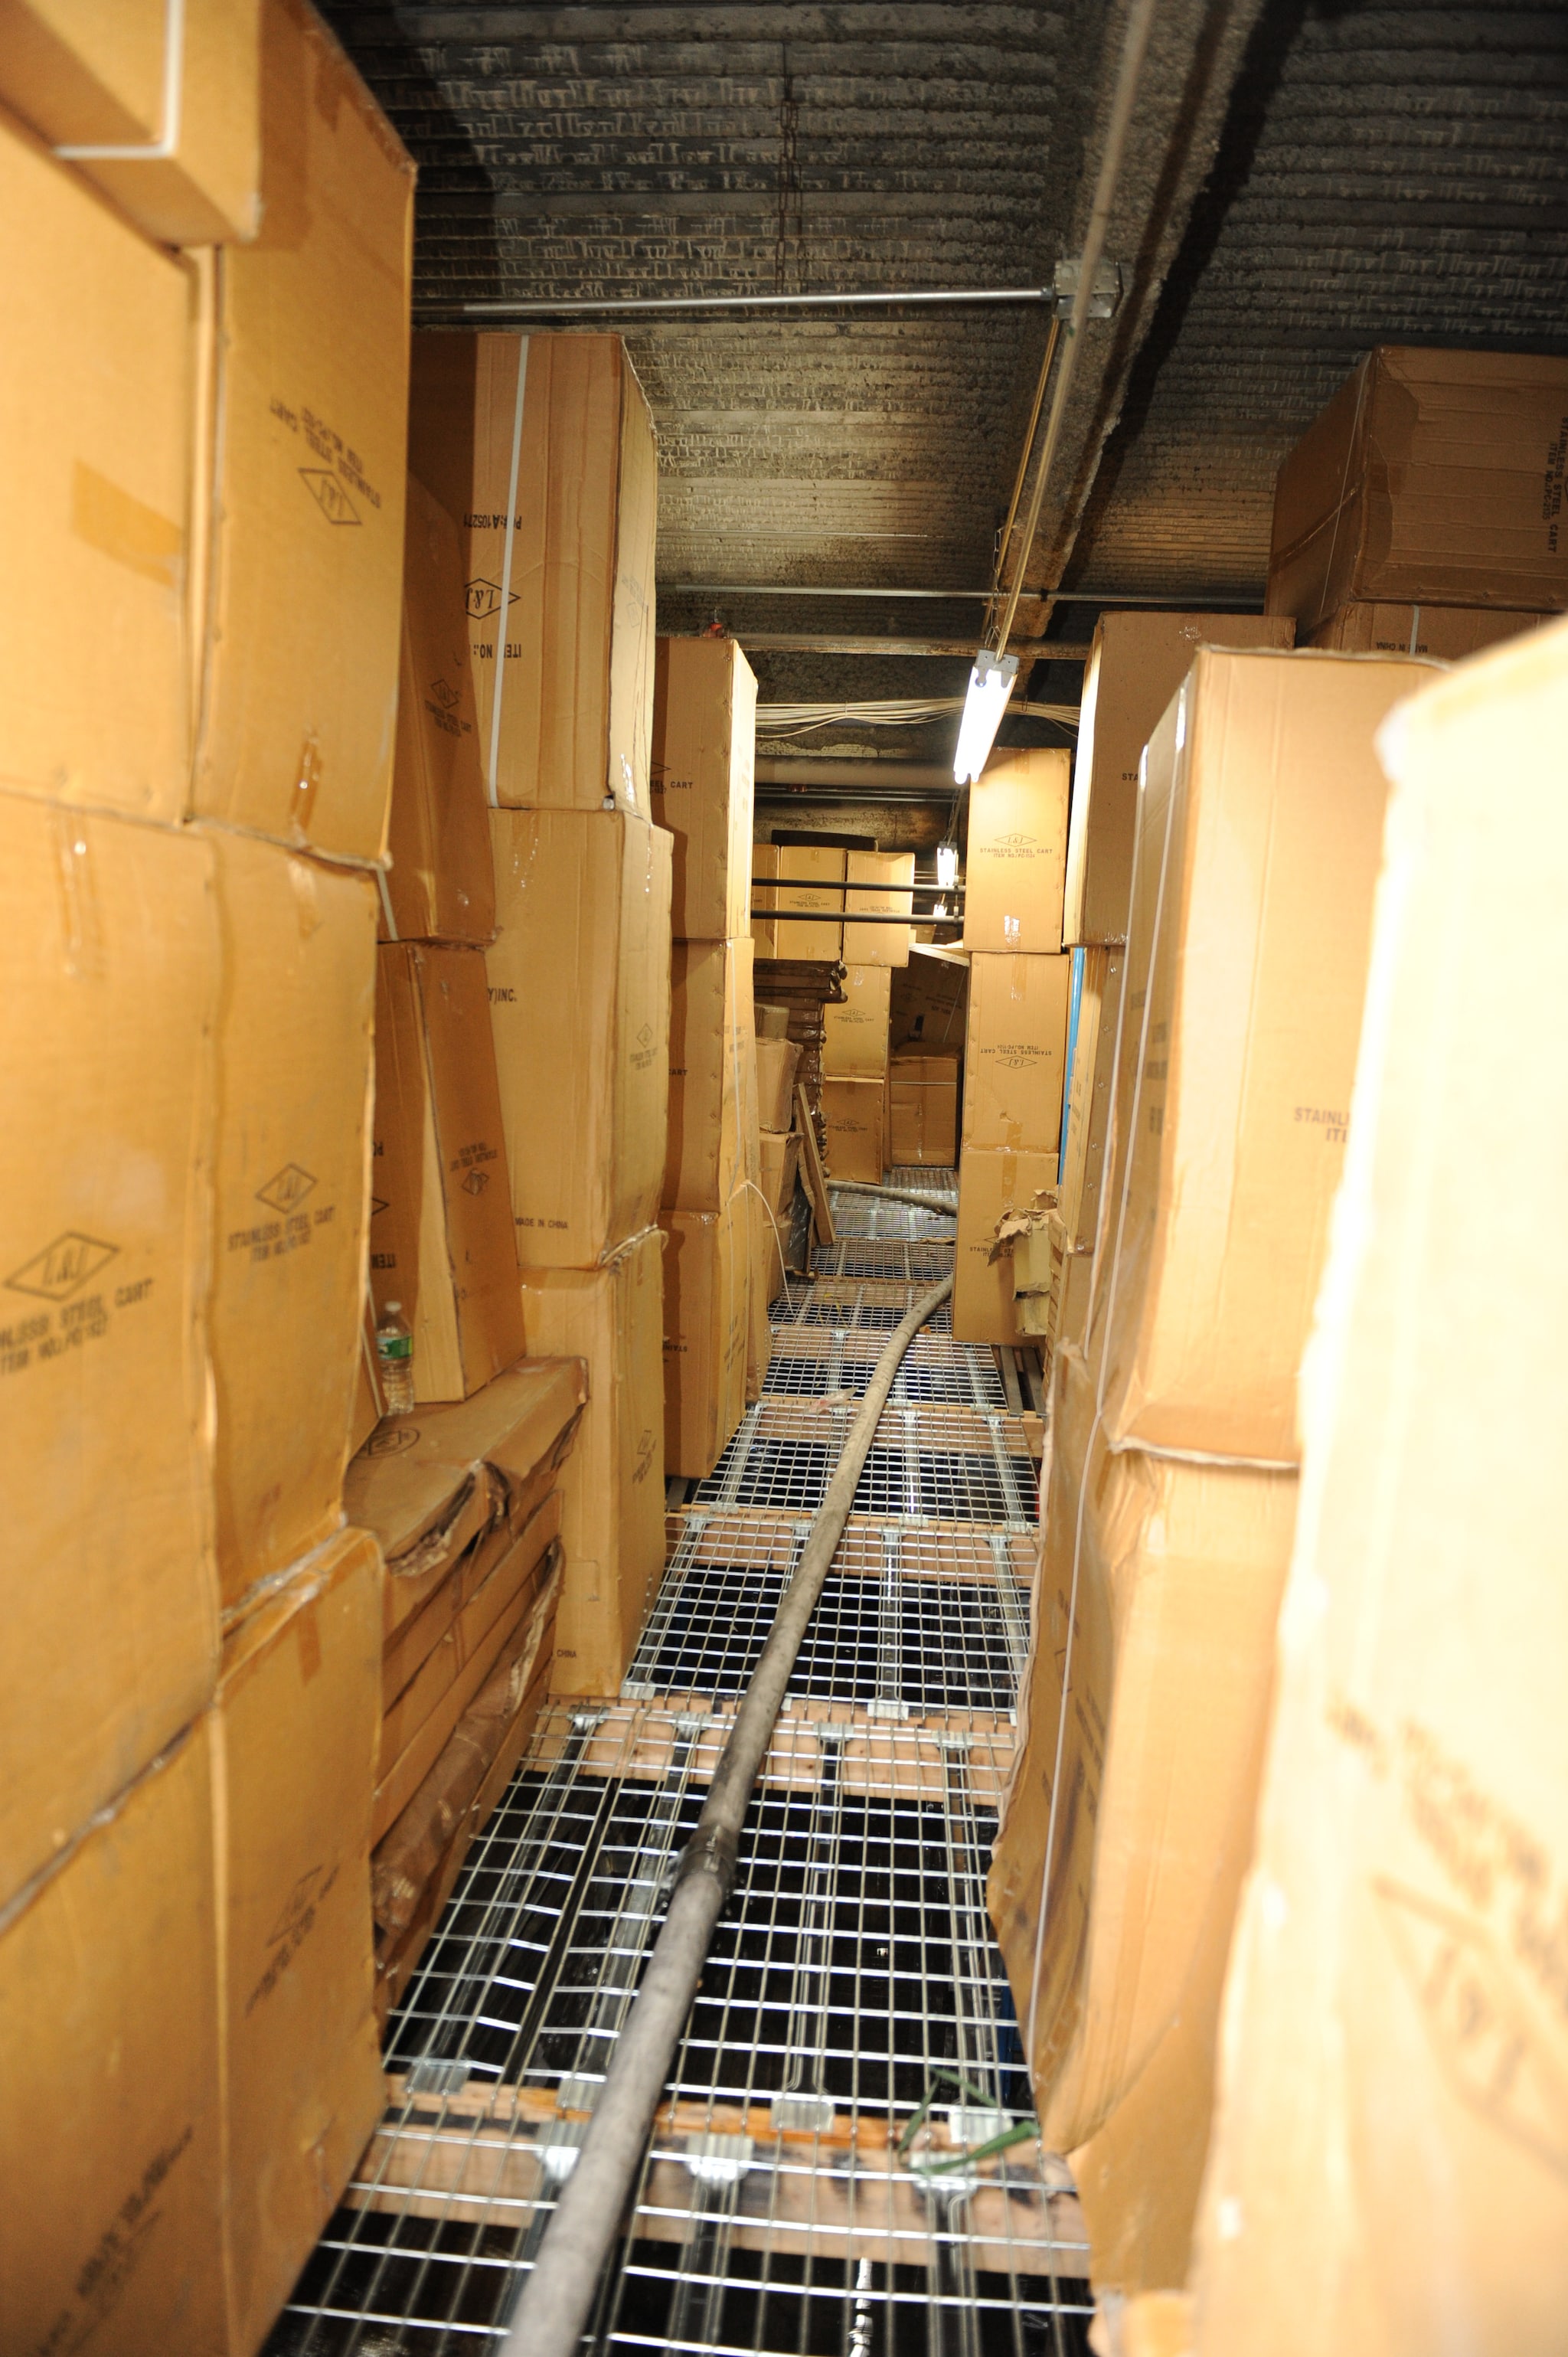 The charged attack hoseline stretched down a narrow aisle of the catwalk storage area. Large cardboard boxes are stacked from floor to ceiling on either side of the aisle.